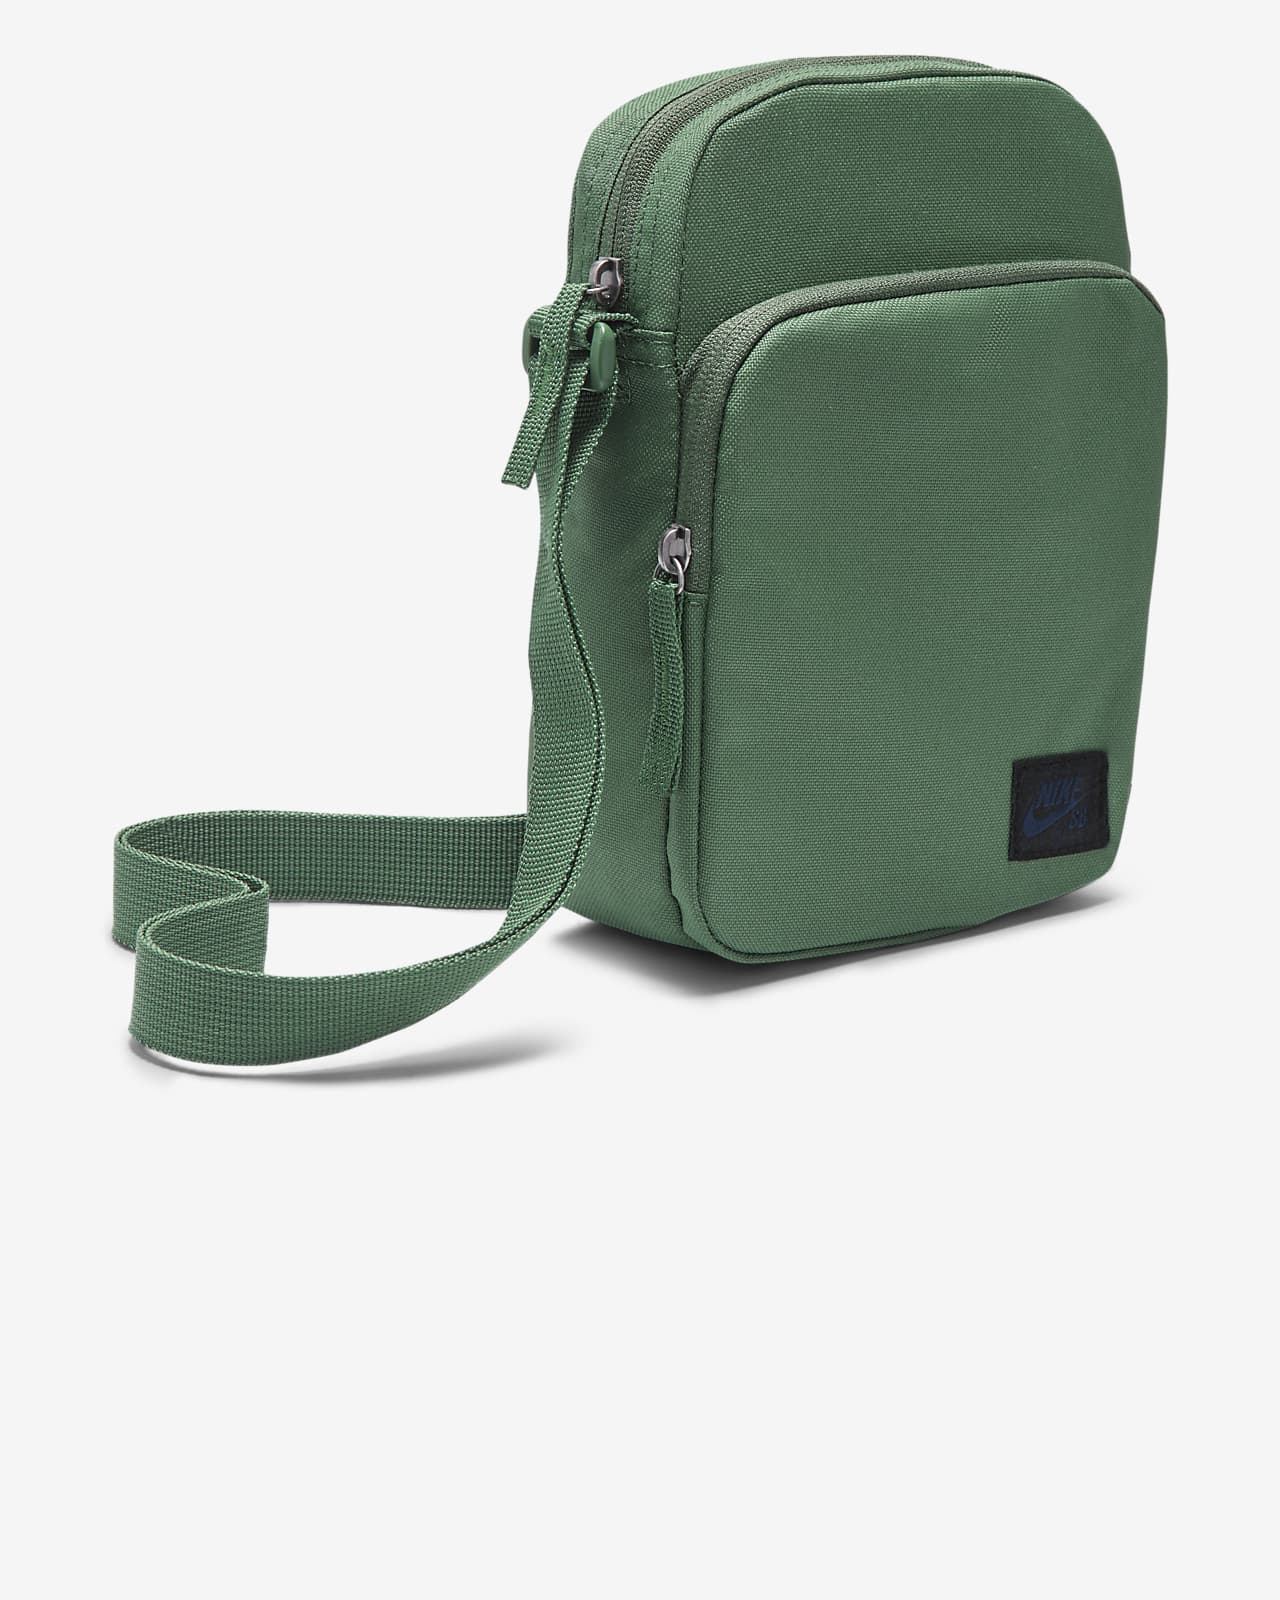 Nike NIKE SB RPM skateboard backpack student school bag for men and women  BA5130 BA5403 BA5404 - China-Purchaser.com - Buy China shop at Wholesale  Price By Online English Taobao Agent